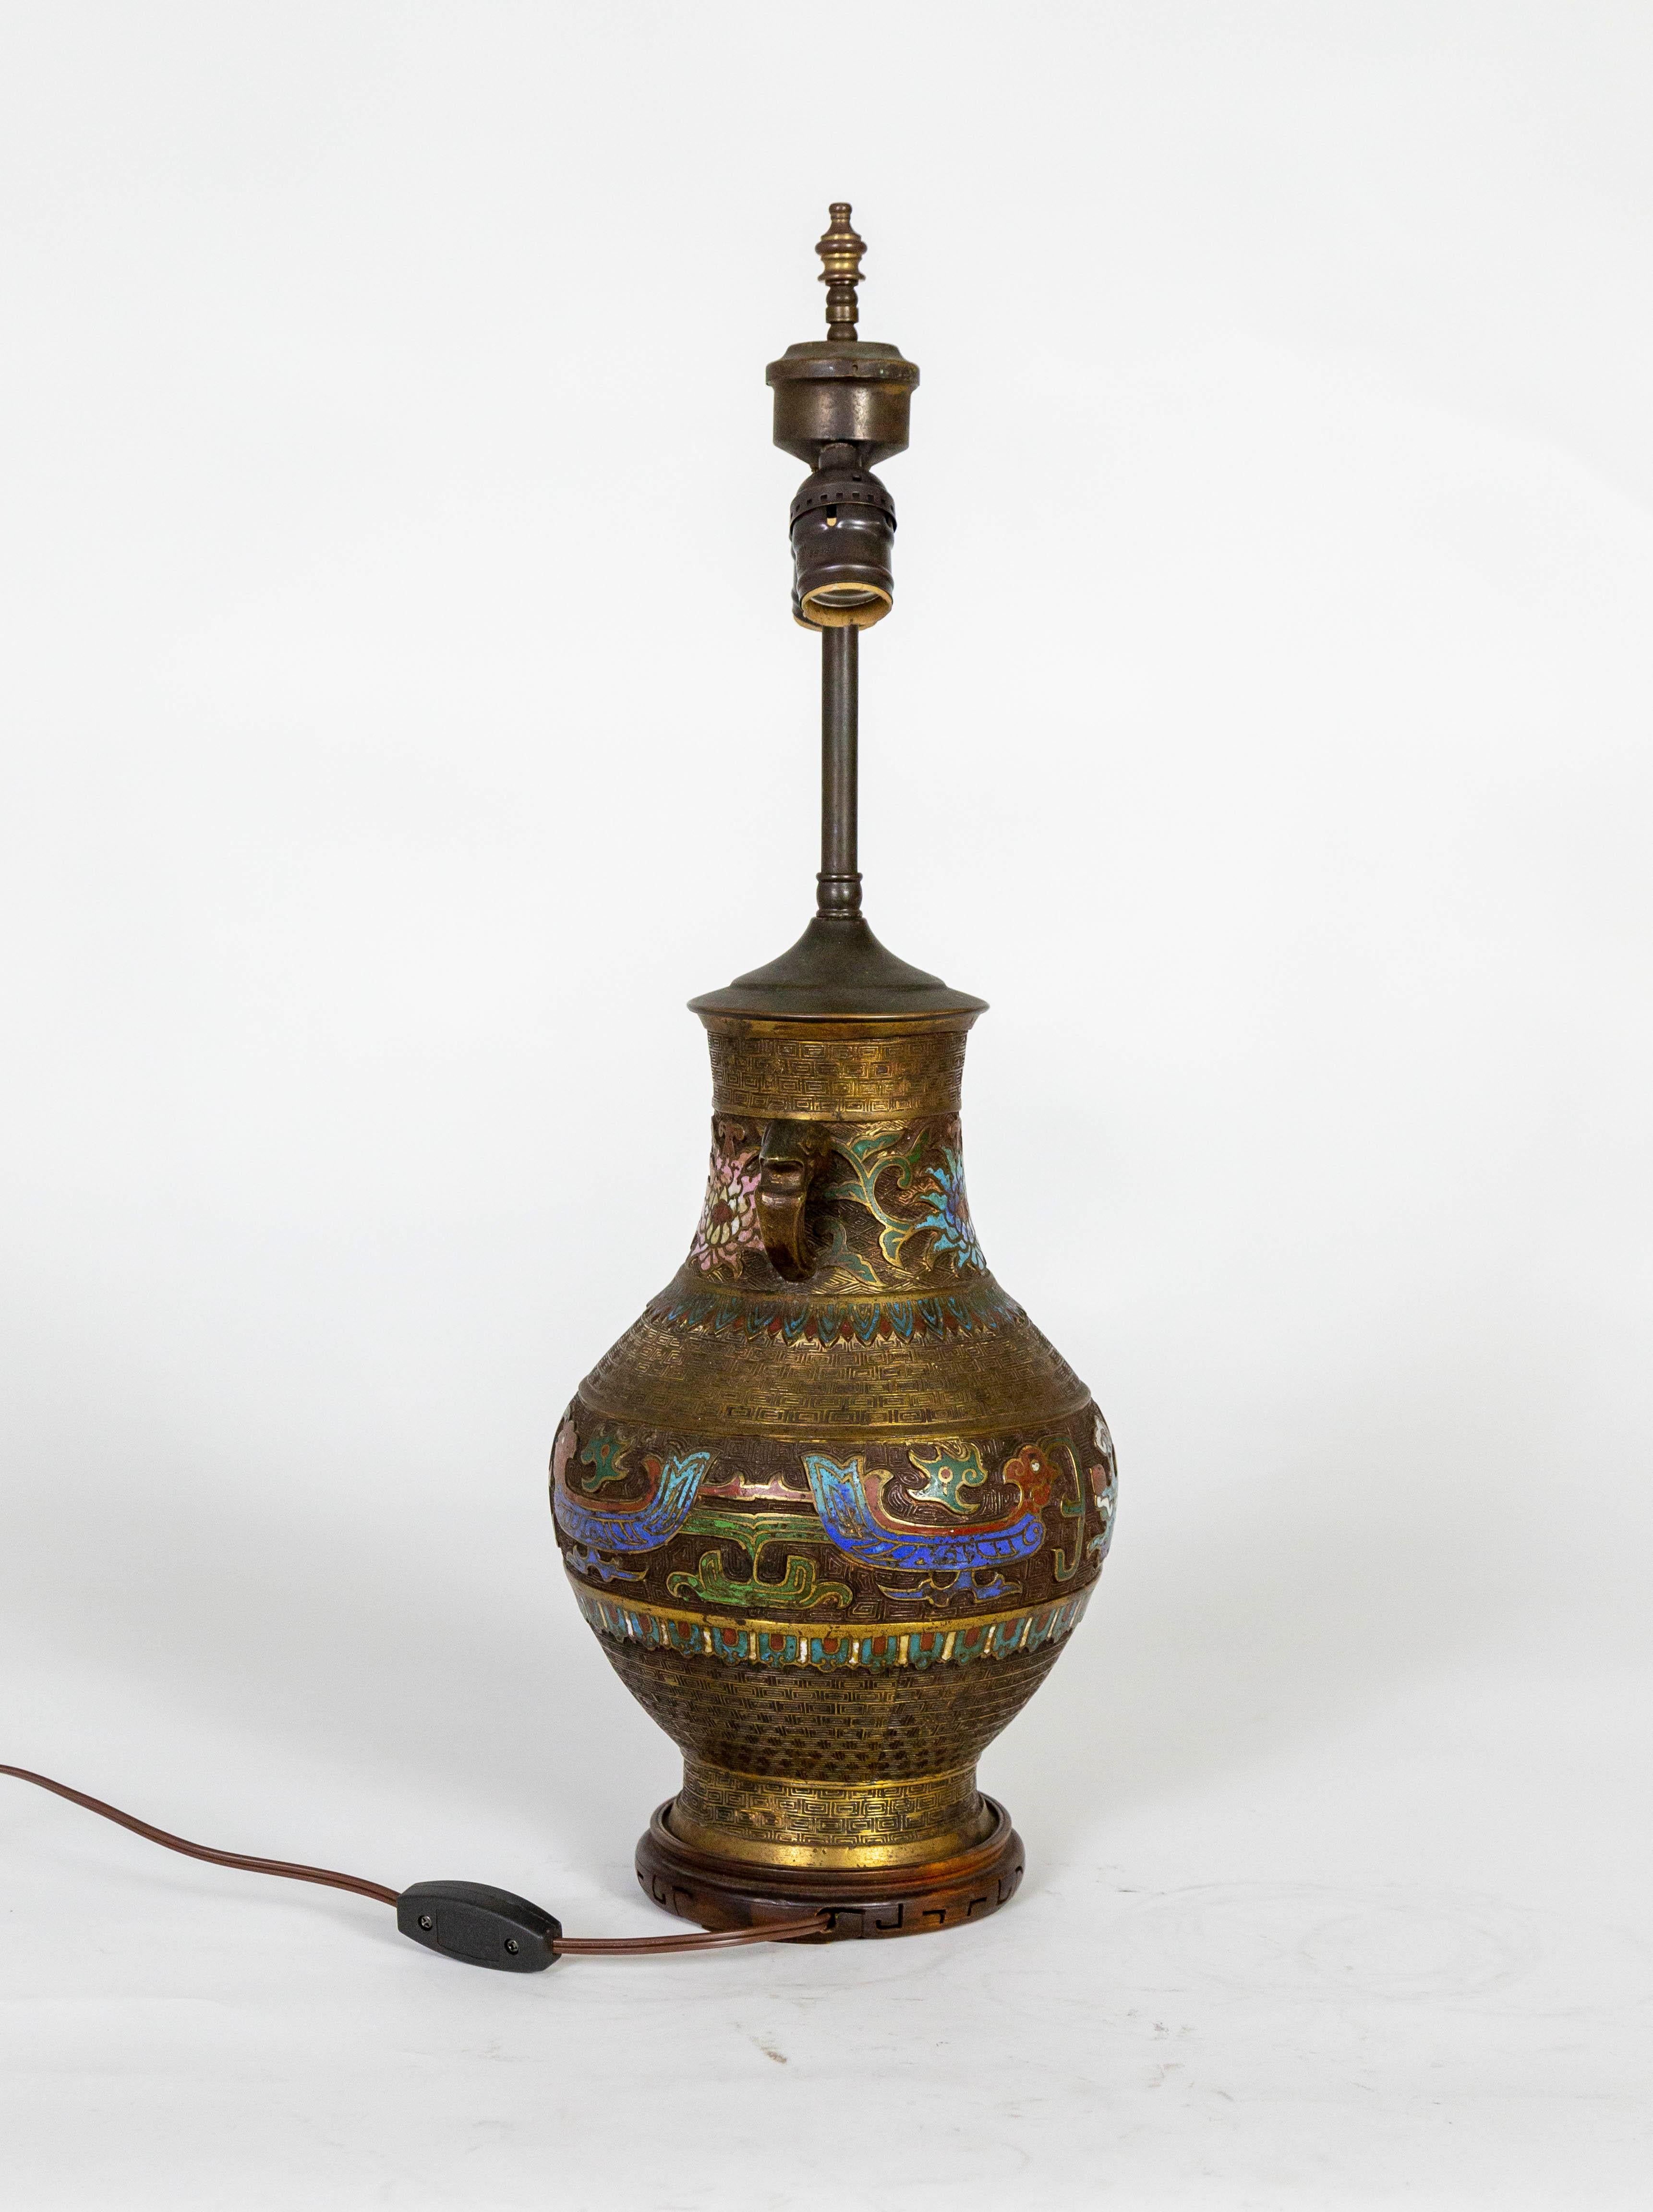 Asian Etched Bronze & Champleve Enamel Urn Vase as Lamp In Good Condition For Sale In San Francisco, CA